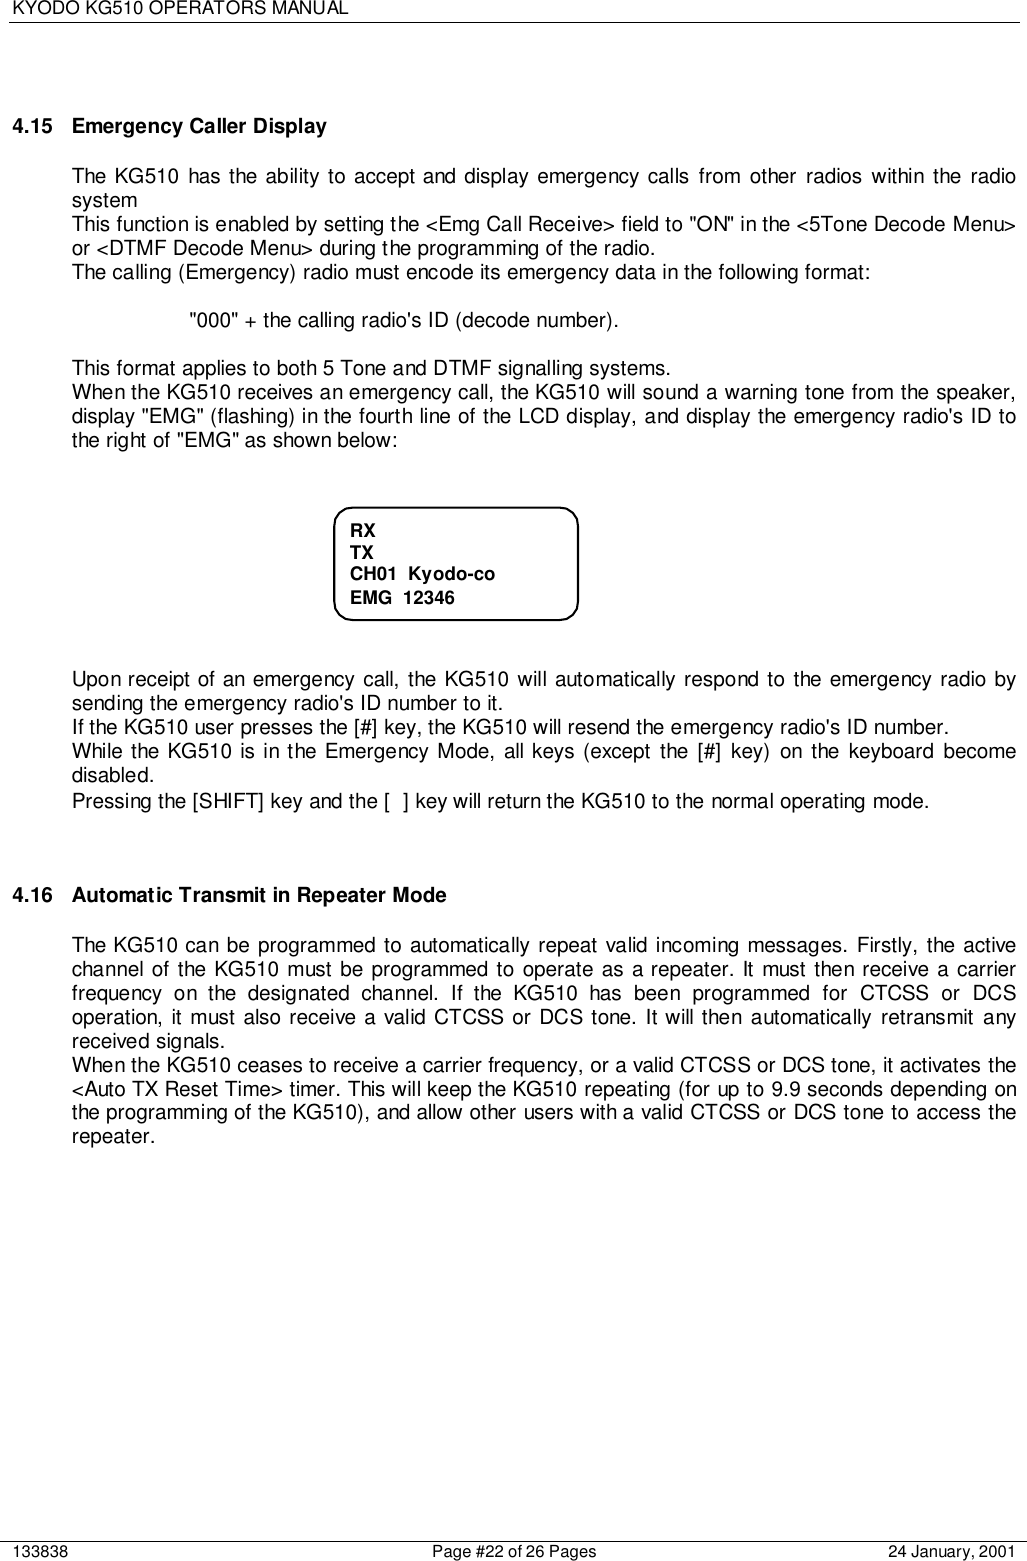 KYODO KG510 OPERATORS MANUAL133838 Page #22 of 26 Pages 24 January, 20014.15  Emergency Caller DisplayThe KG510 has the ability to accept and display emergency calls from other radios within the radiosystemThis function is enabled by setting the &lt;Emg Call Receive&gt; field to &quot;ON&quot; in the &lt;5Tone Decode Menu&gt;or &lt;DTMF Decode Menu&gt; during the programming of the radio.The calling (Emergency) radio must encode its emergency data in the following format:&quot;000&quot; + the calling radio&apos;s ID (decode number).This format applies to both 5 Tone and DTMF signalling systems.When the KG510 receives an emergency call, the KG510 will sound a warning tone from the speaker,display &quot;EMG&quot; (flashing) in the fourth line of the LCD display, and display the emergency radio&apos;s ID tothe right of &quot;EMG&quot; as shown below:Upon receipt of an emergency call, the KG510 will automatically respond to the emergency radio bysending the emergency radio&apos;s ID number to it.If the KG510 user presses the [#] key, the KG510 will resend the emergency radio&apos;s ID number.While the KG510 is in the Emergency Mode, all keys (except the [#] key) on the keyboard becomedisabled.Pressing the [SHIFT] key and the [ ] key will return the KG510 to the normal operating mode.4.16  Automatic Transmit in Repeater ModeThe KG510 can be programmed to automatically repeat valid incoming messages. Firstly, the activechannel of the KG510 must be programmed to operate as a repeater. It must then receive a carrierfrequency on the designated channel. If the KG510 has been programmed for CTCSS or DCSoperation, it must also receive a valid CTCSS or DCS tone. It will then automatically retransmit anyreceived signals.When the KG510 ceases to receive a carrier frequency, or a valid CTCSS or DCS tone, it activates the&lt;Auto TX Reset Time&gt; timer. This will keep the KG510 repeating (for up to 9.9 seconds depending onthe programming of the KG510), and allow other users with a valid CTCSS or DCS tone to access therepeater.RXTXCH01  Kyodo-coEMG  12346